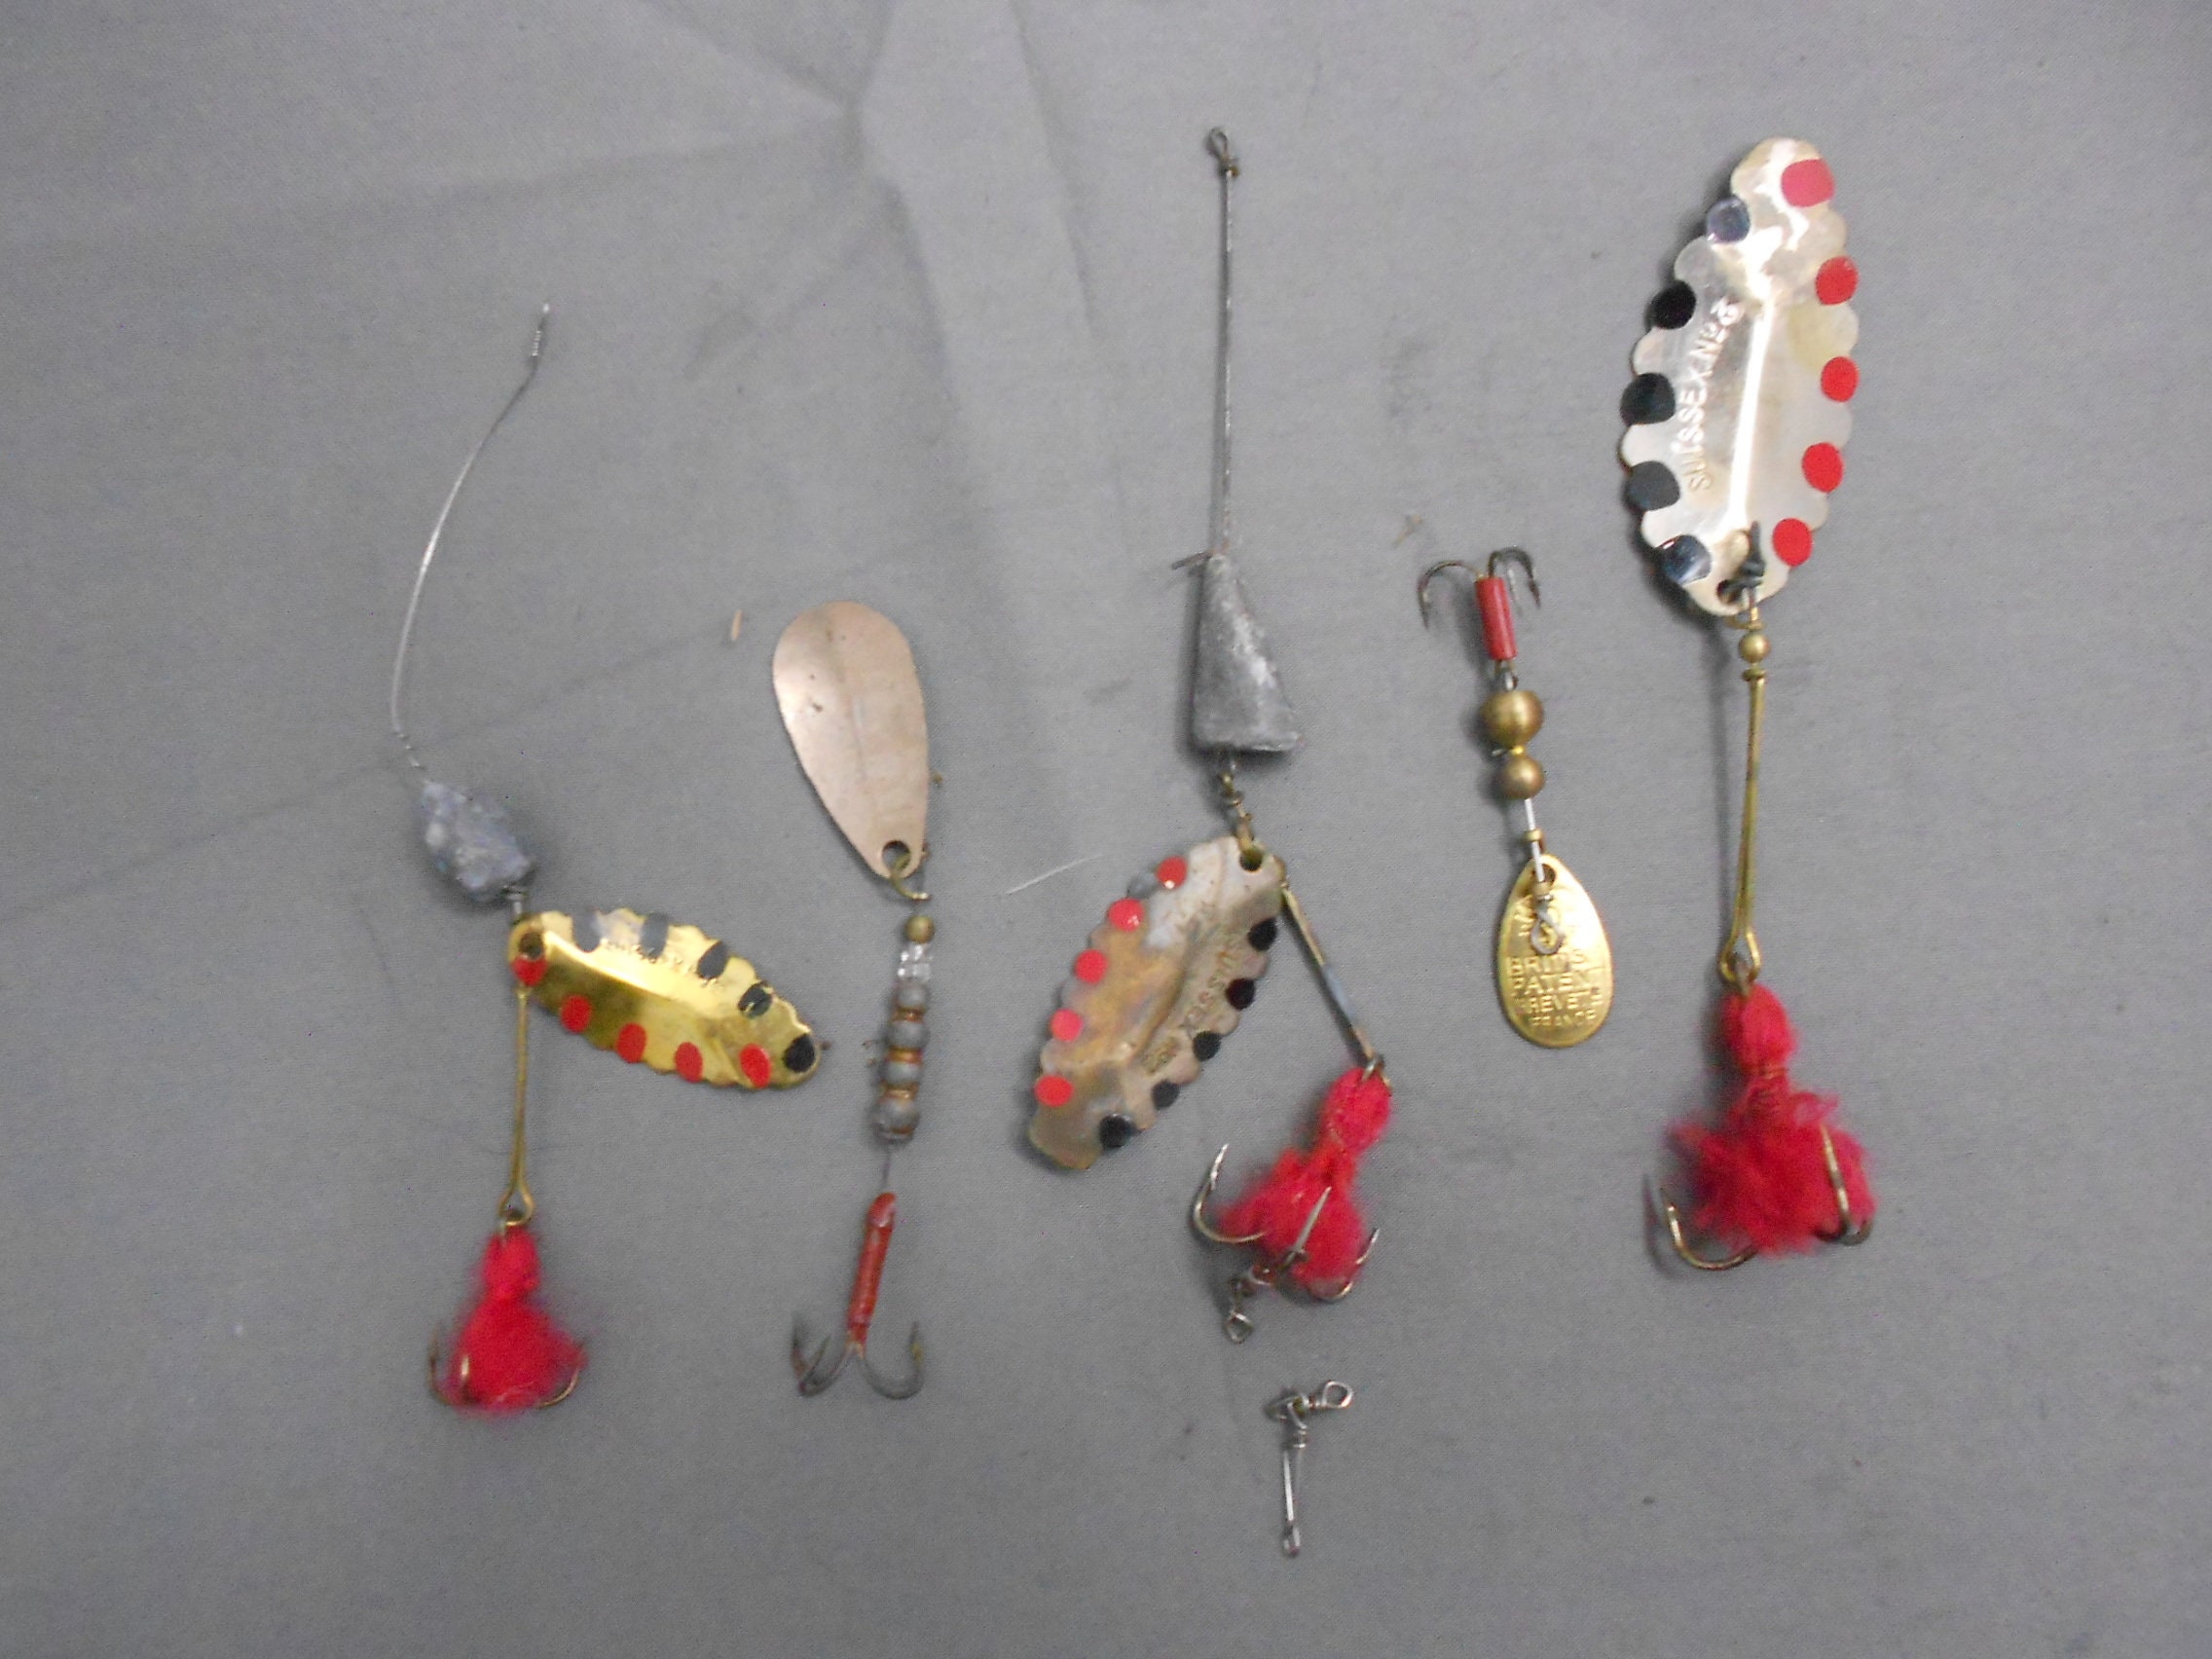 Lot of 5 Lures Spinners Etc Vintage Antique Angling Spinner Fishing Lure  From France or Switzerland Suissex Etc 1960s Price for All 5 Lures -   Denmark